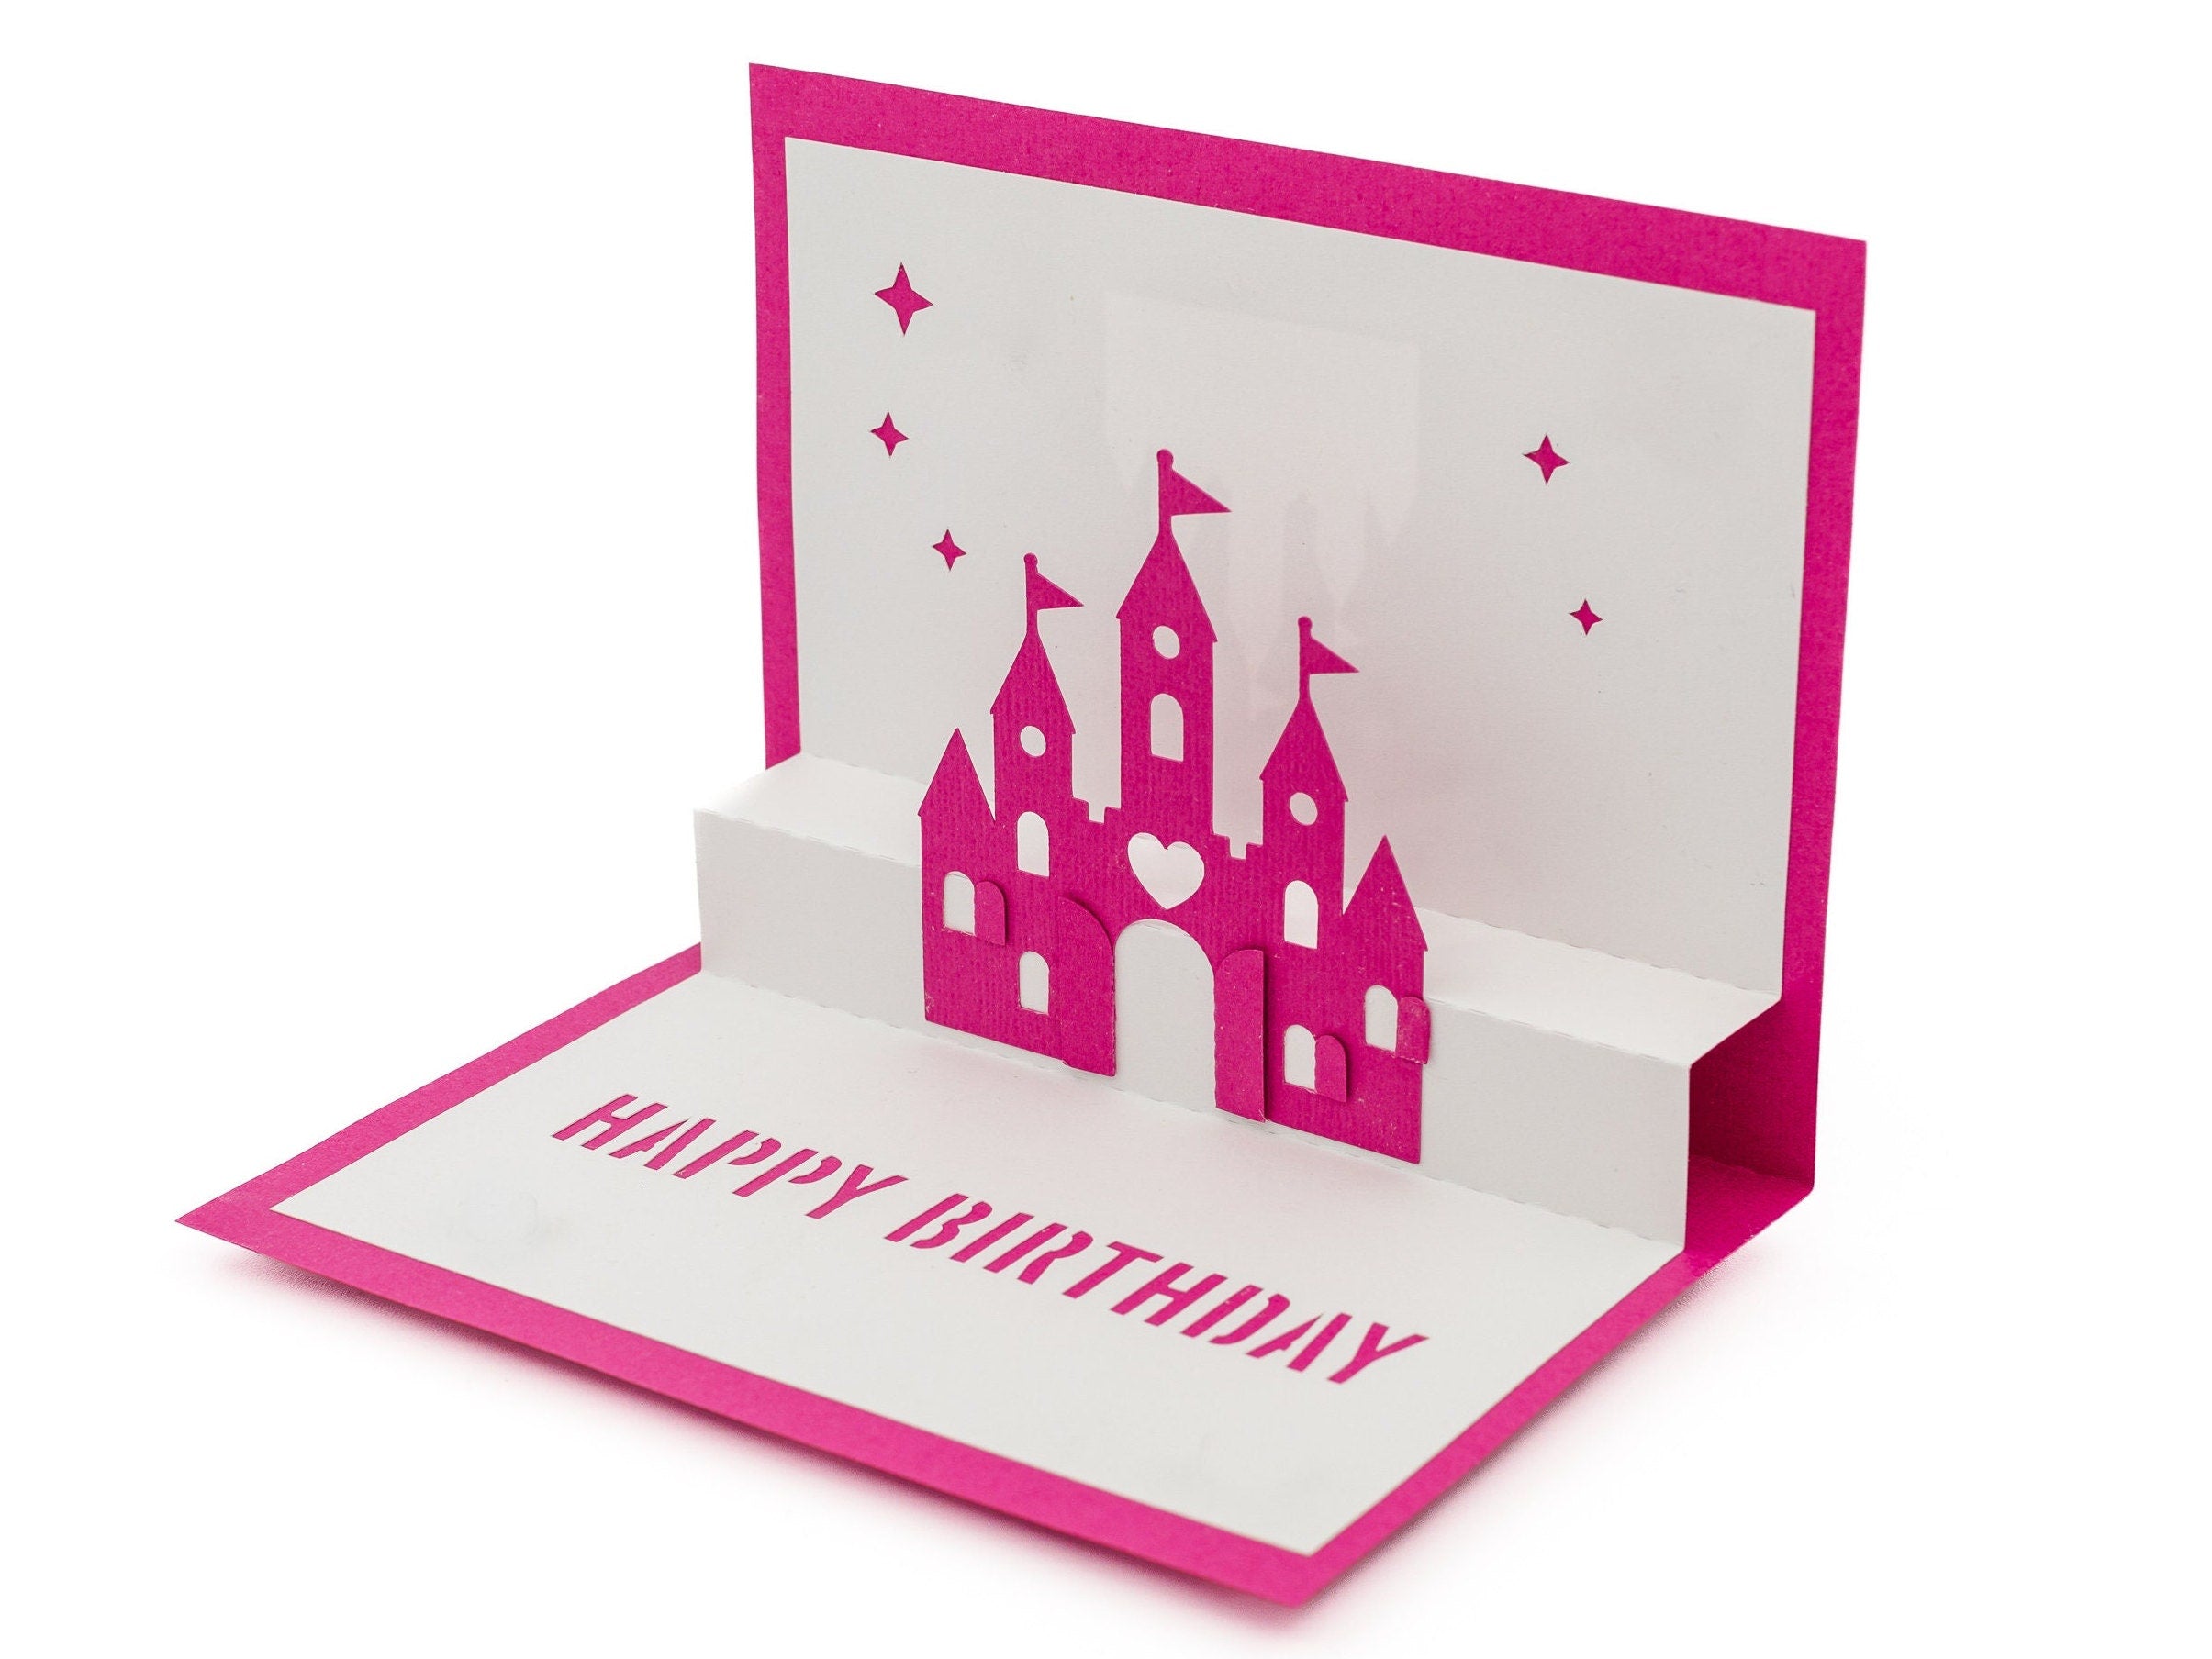 Fairytale Castle Birthday 3D Pop Up Card | Princess Design Greeting | Handmade Special Gift | Unique Whimsical Keepsake | Magical Gift